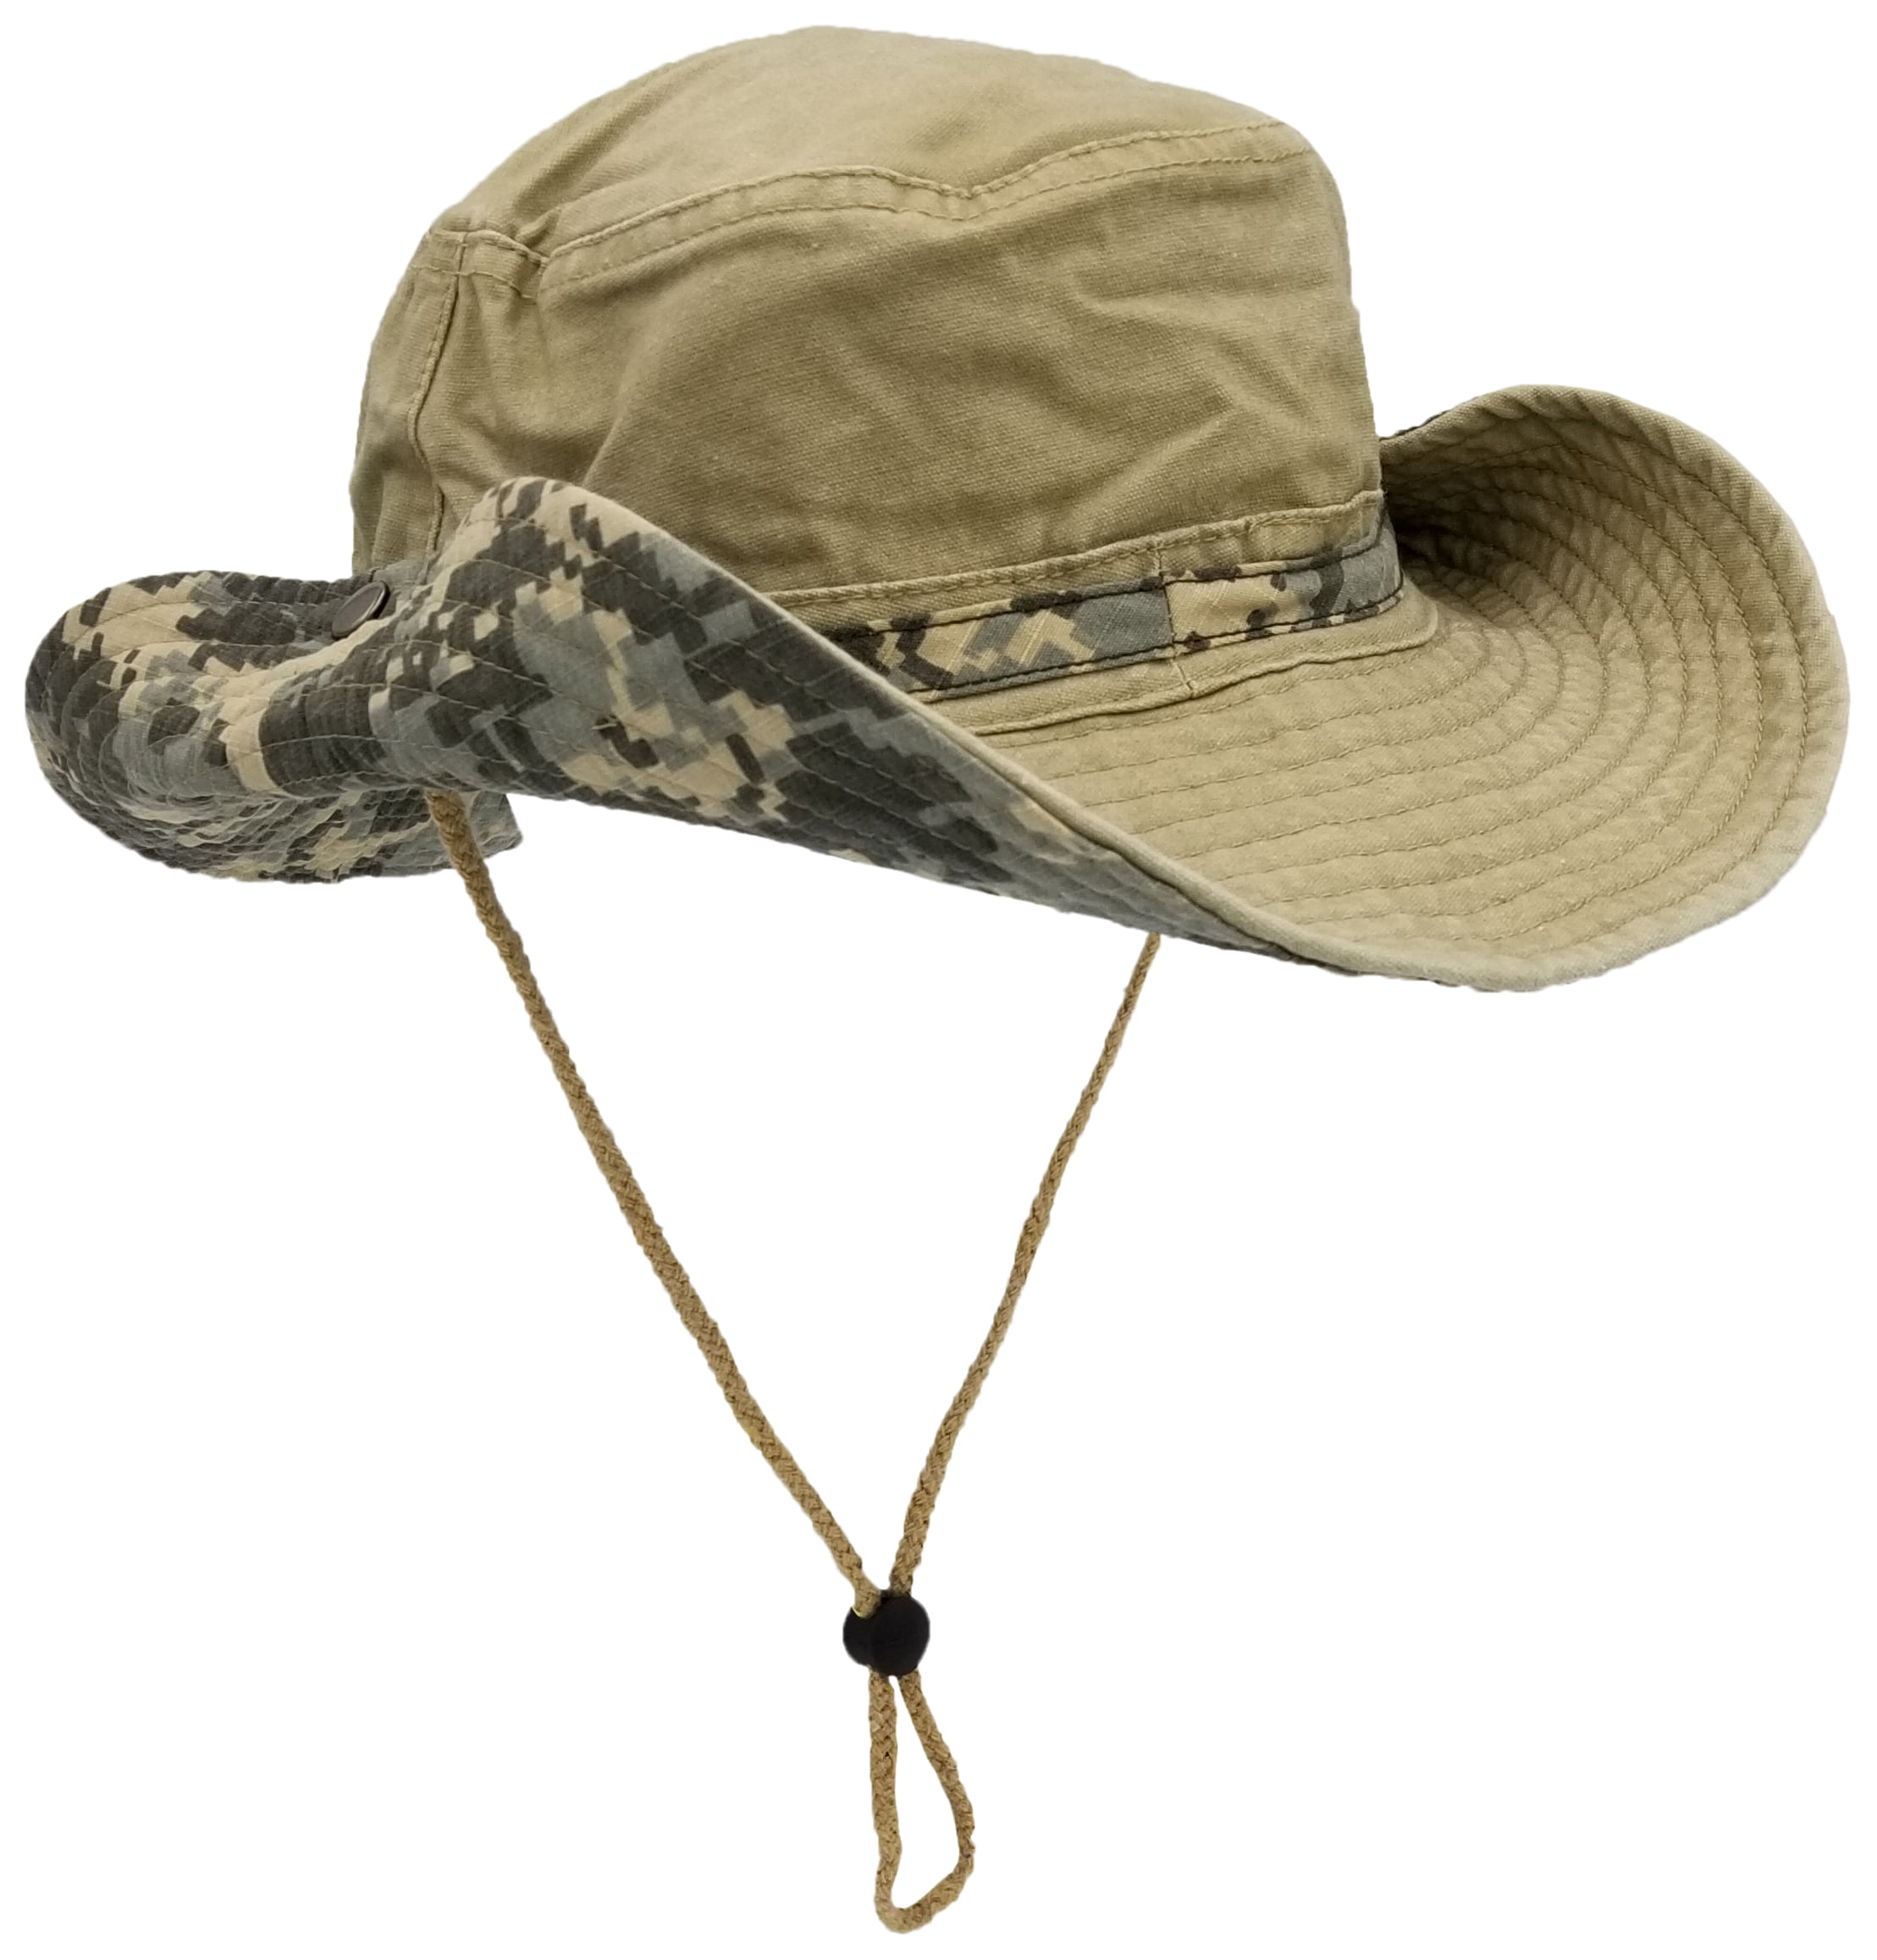 Fishing Camping Outdoor Boonie Sun Hat for Hiking Operator Floppy Military Camo Summer Cap for Men or Women 